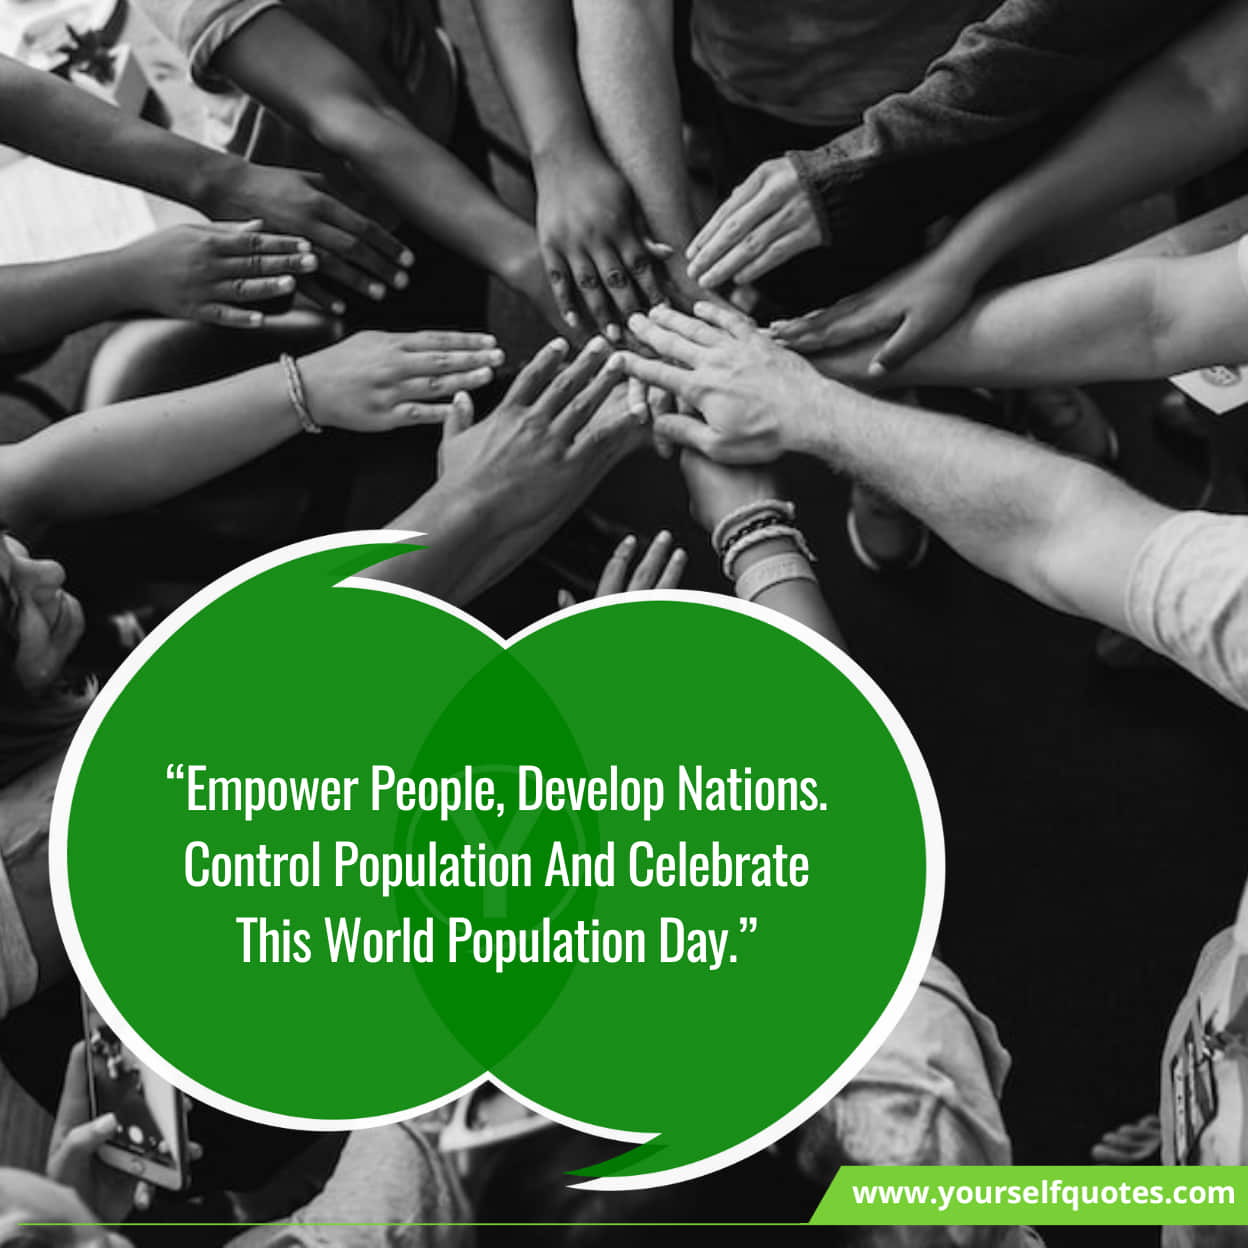 Quotes on addressing overpopulation and environmental sustainability